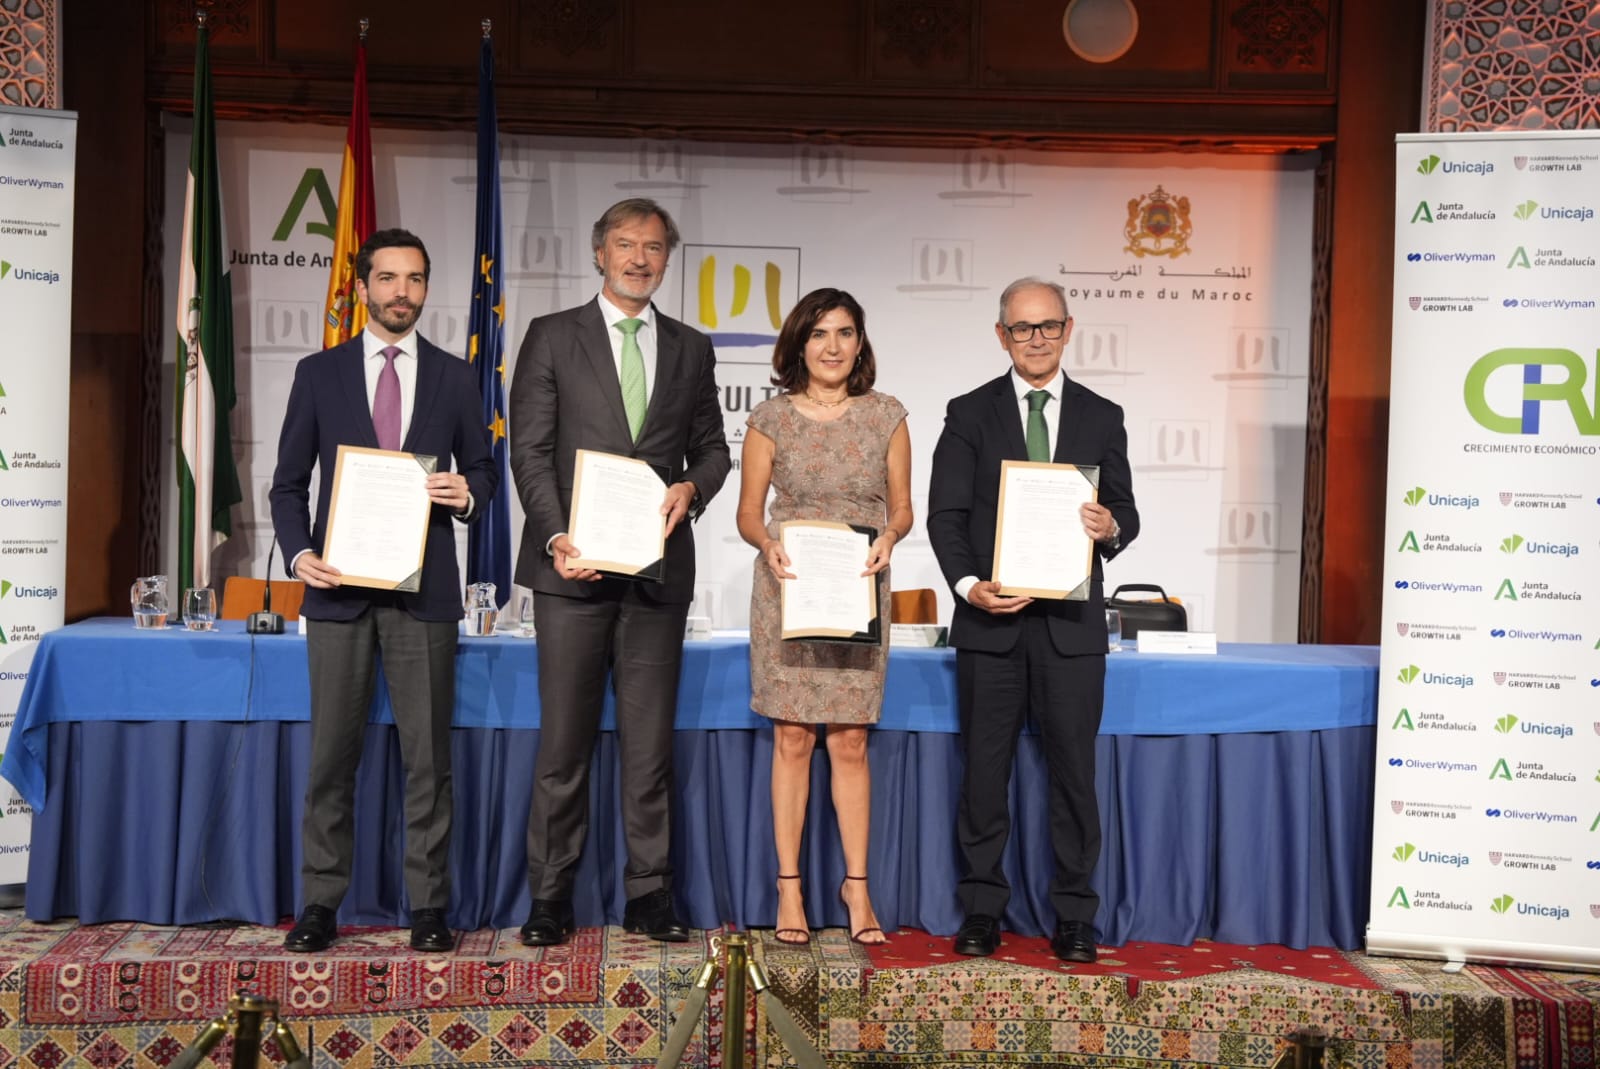 Junta de Andalucía, Unicaja, Harvard and Oliver Wyman seal a pioneering collaboration in Europe to boost economic growth and job creation